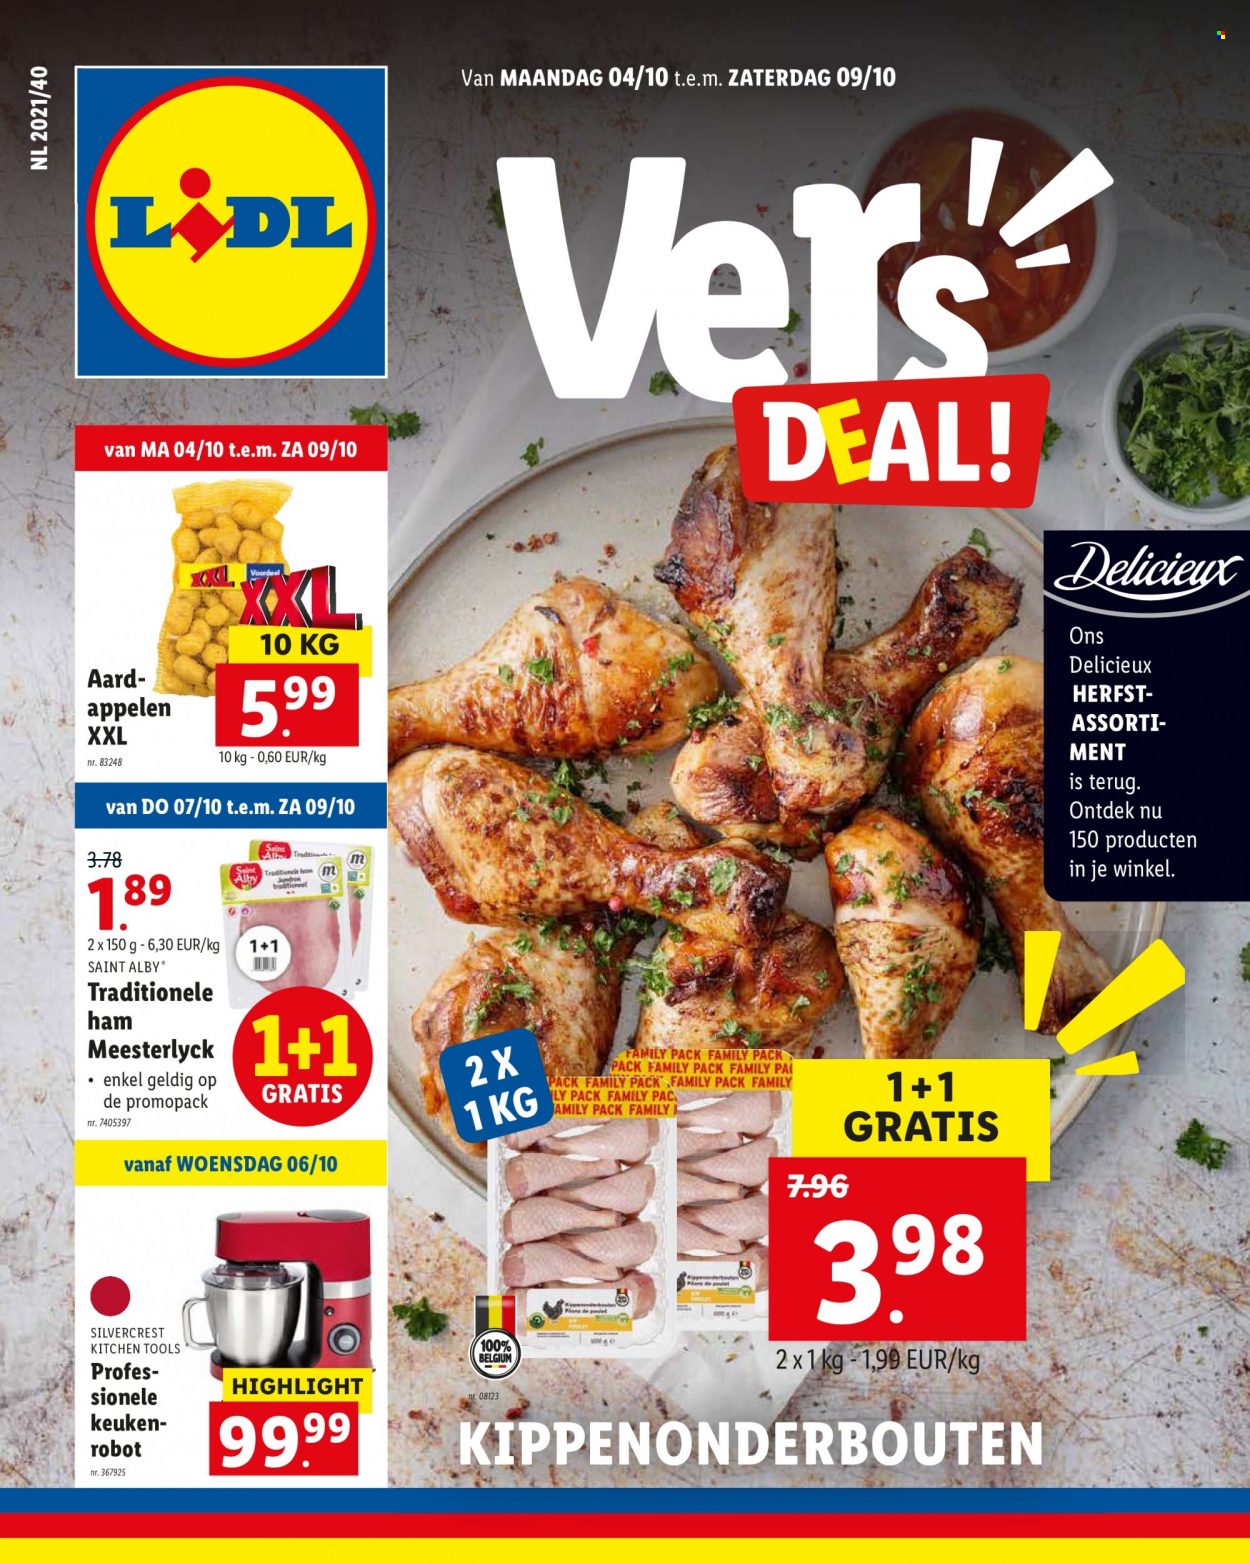 Catalogue Lidl - 4.10.2021 - 9.10.2021. Page 1.